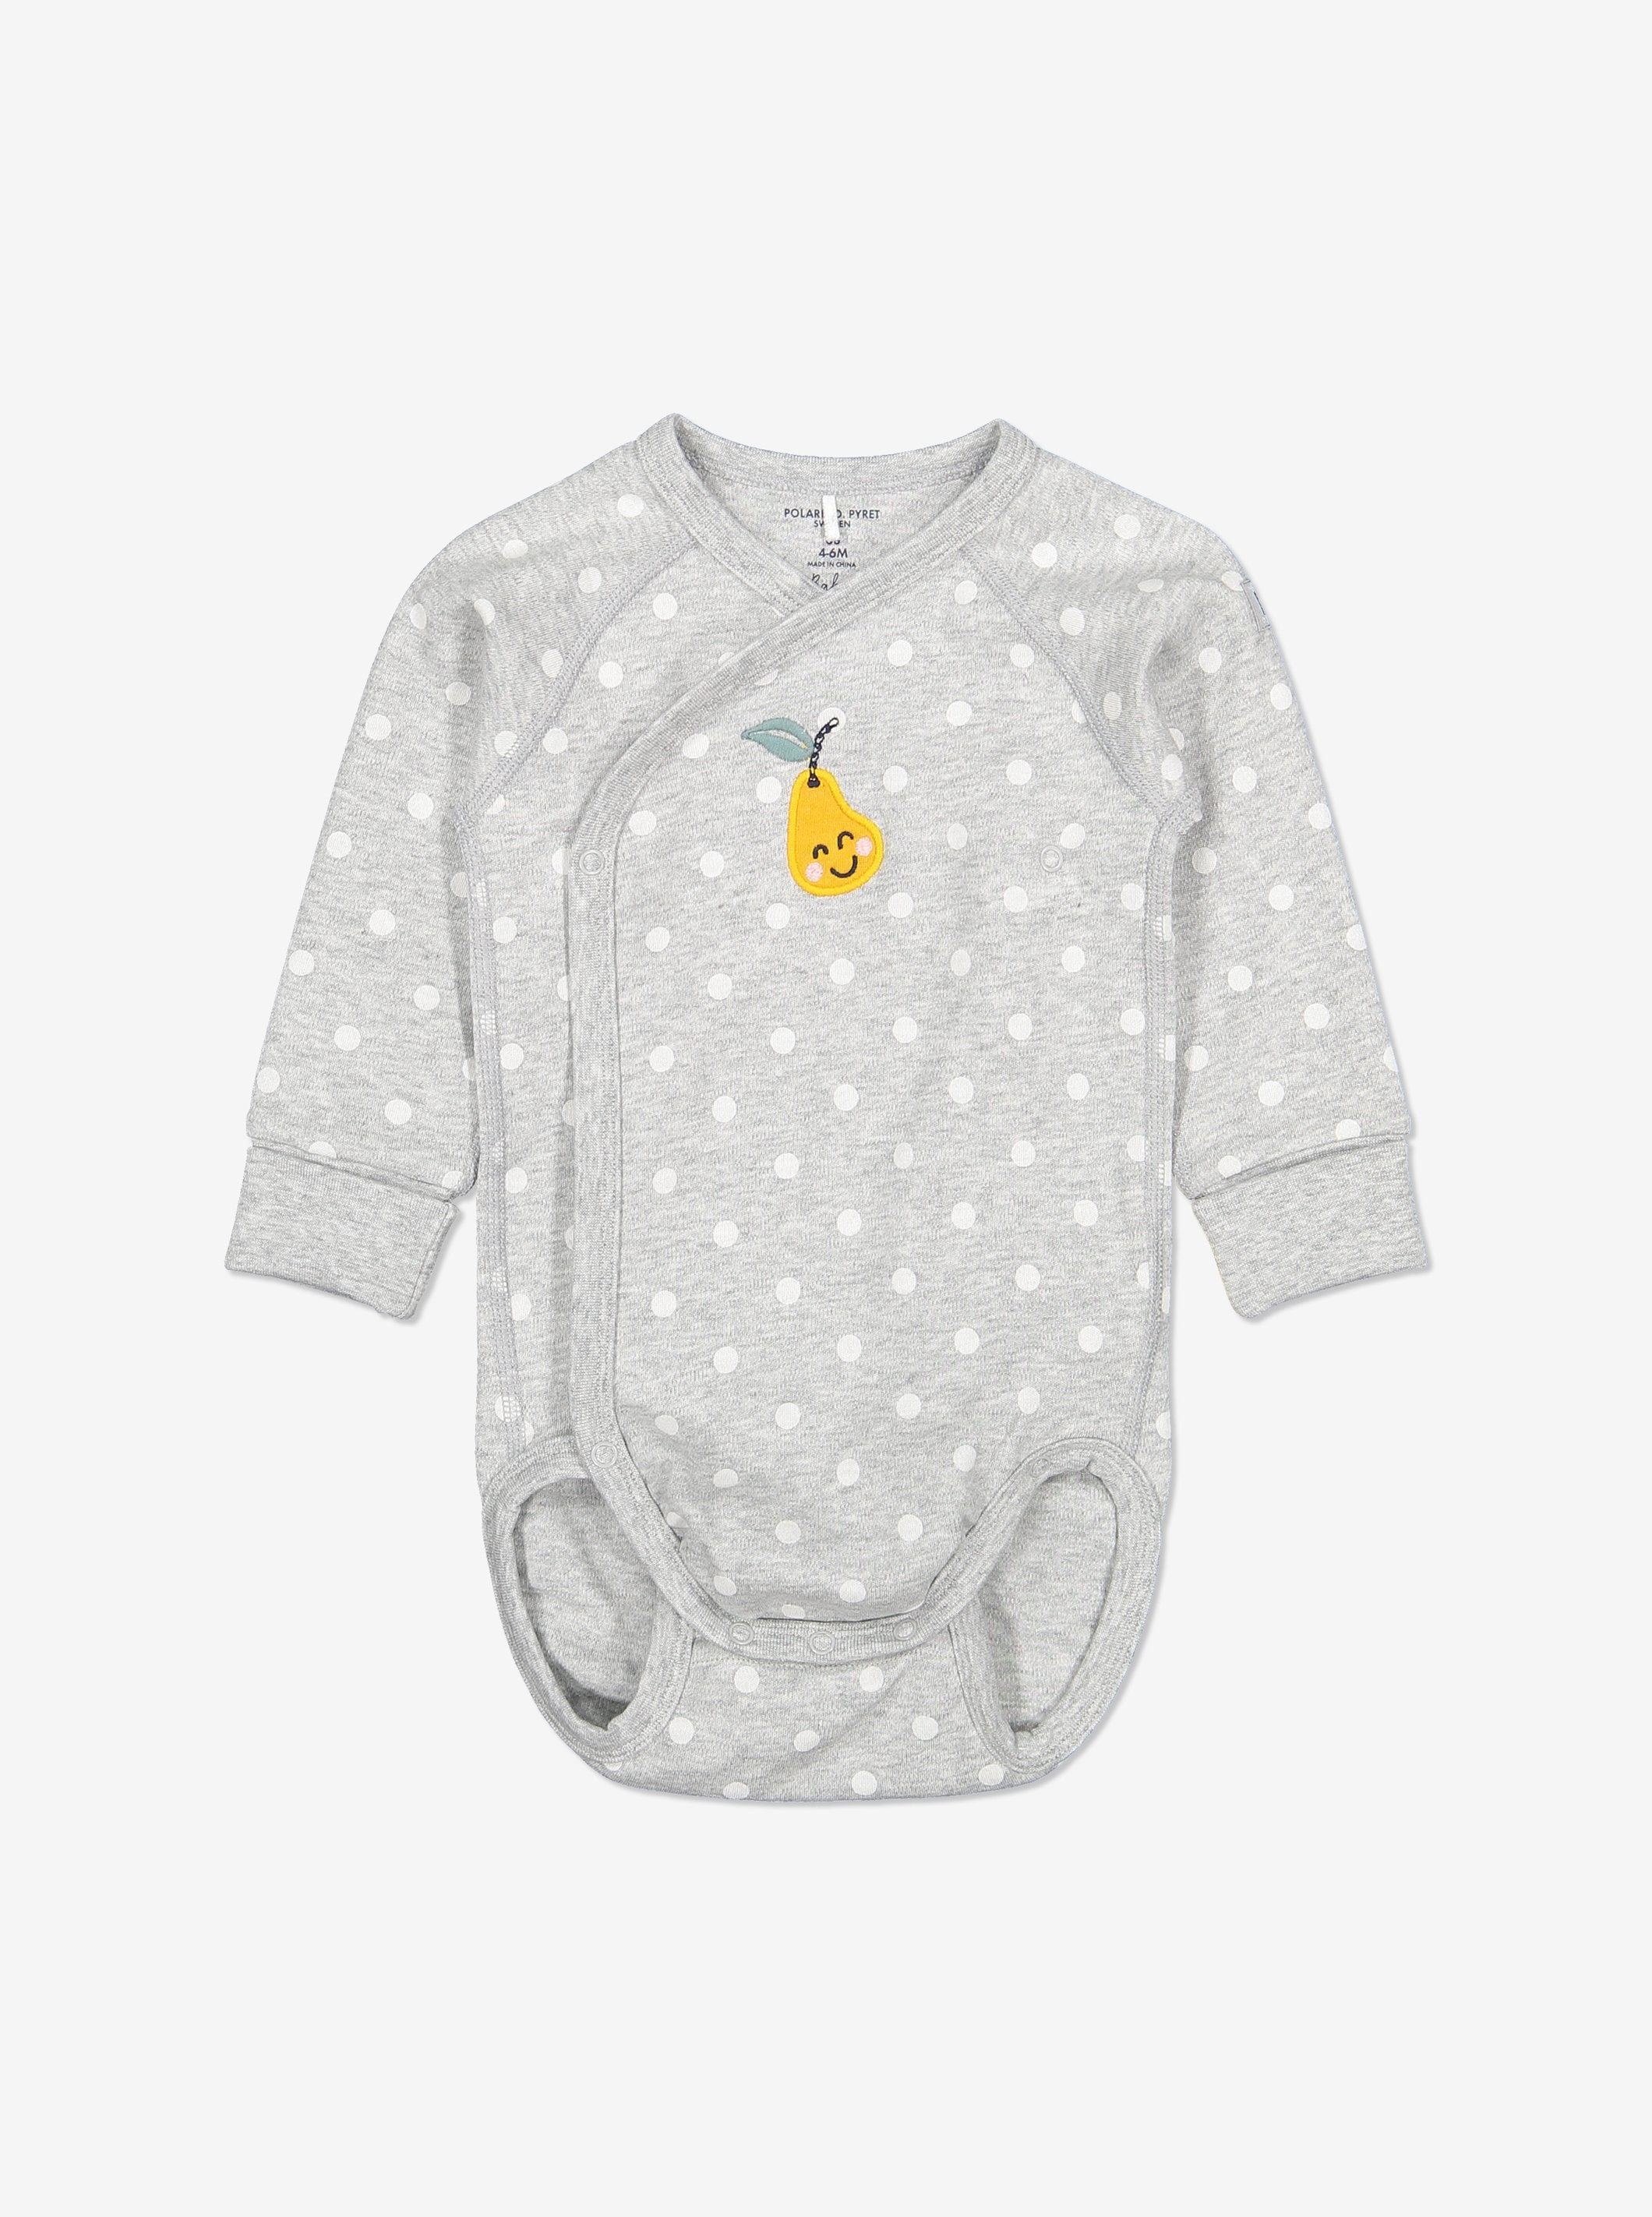 Embroidered Pear Wrapround Babygrow